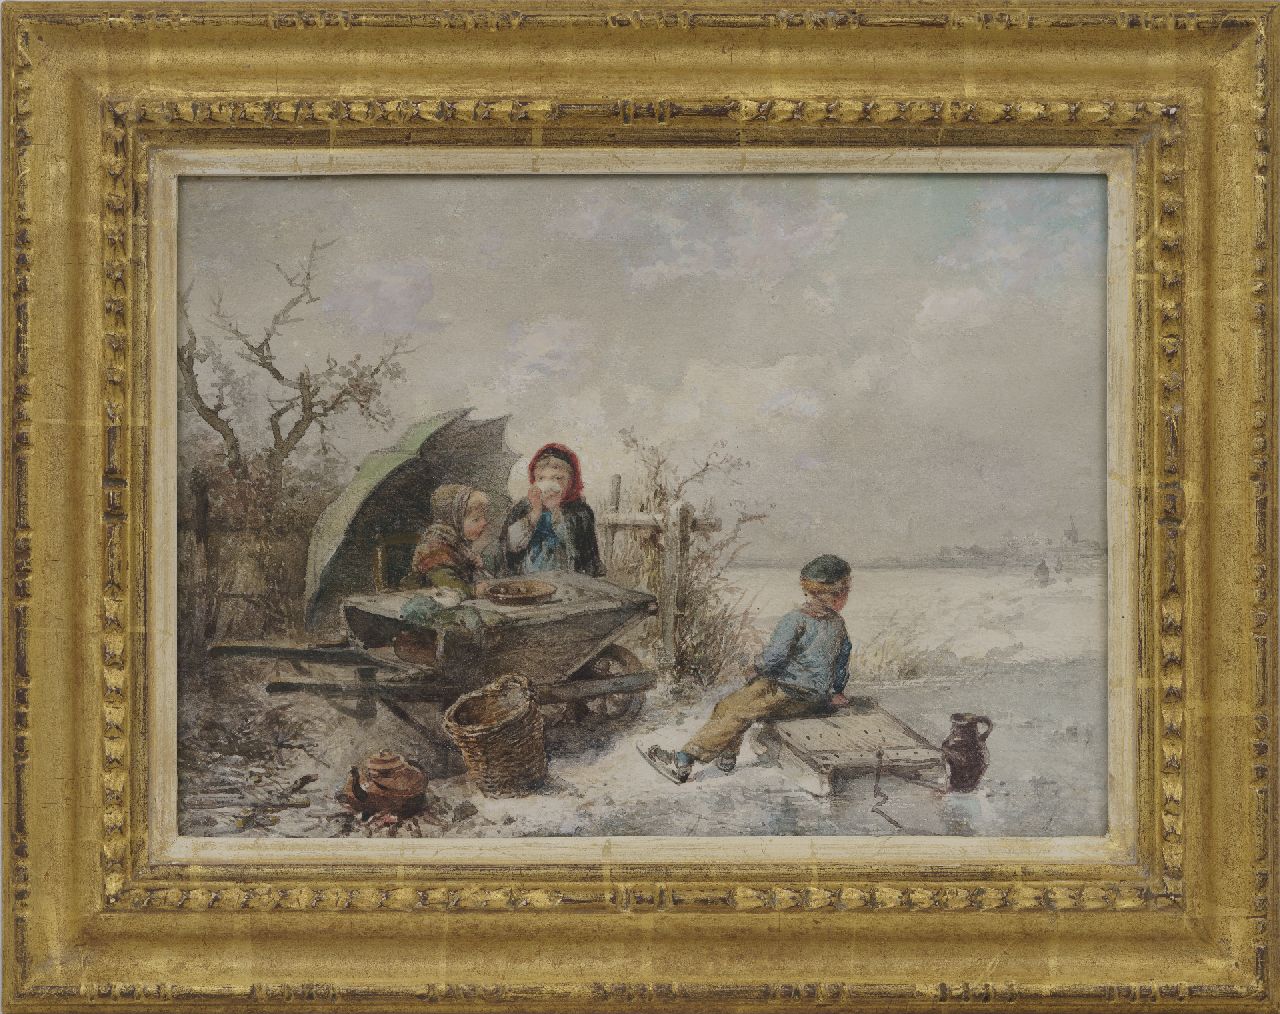 Kate J.M.H. ten | Johan 'Mari' Henri ten Kate | Watercolours and drawings offered for sale | Children playing on the ice, watercolour on paper 25.4 x 35.1 cm, signed l.l. (with fragments of signature)